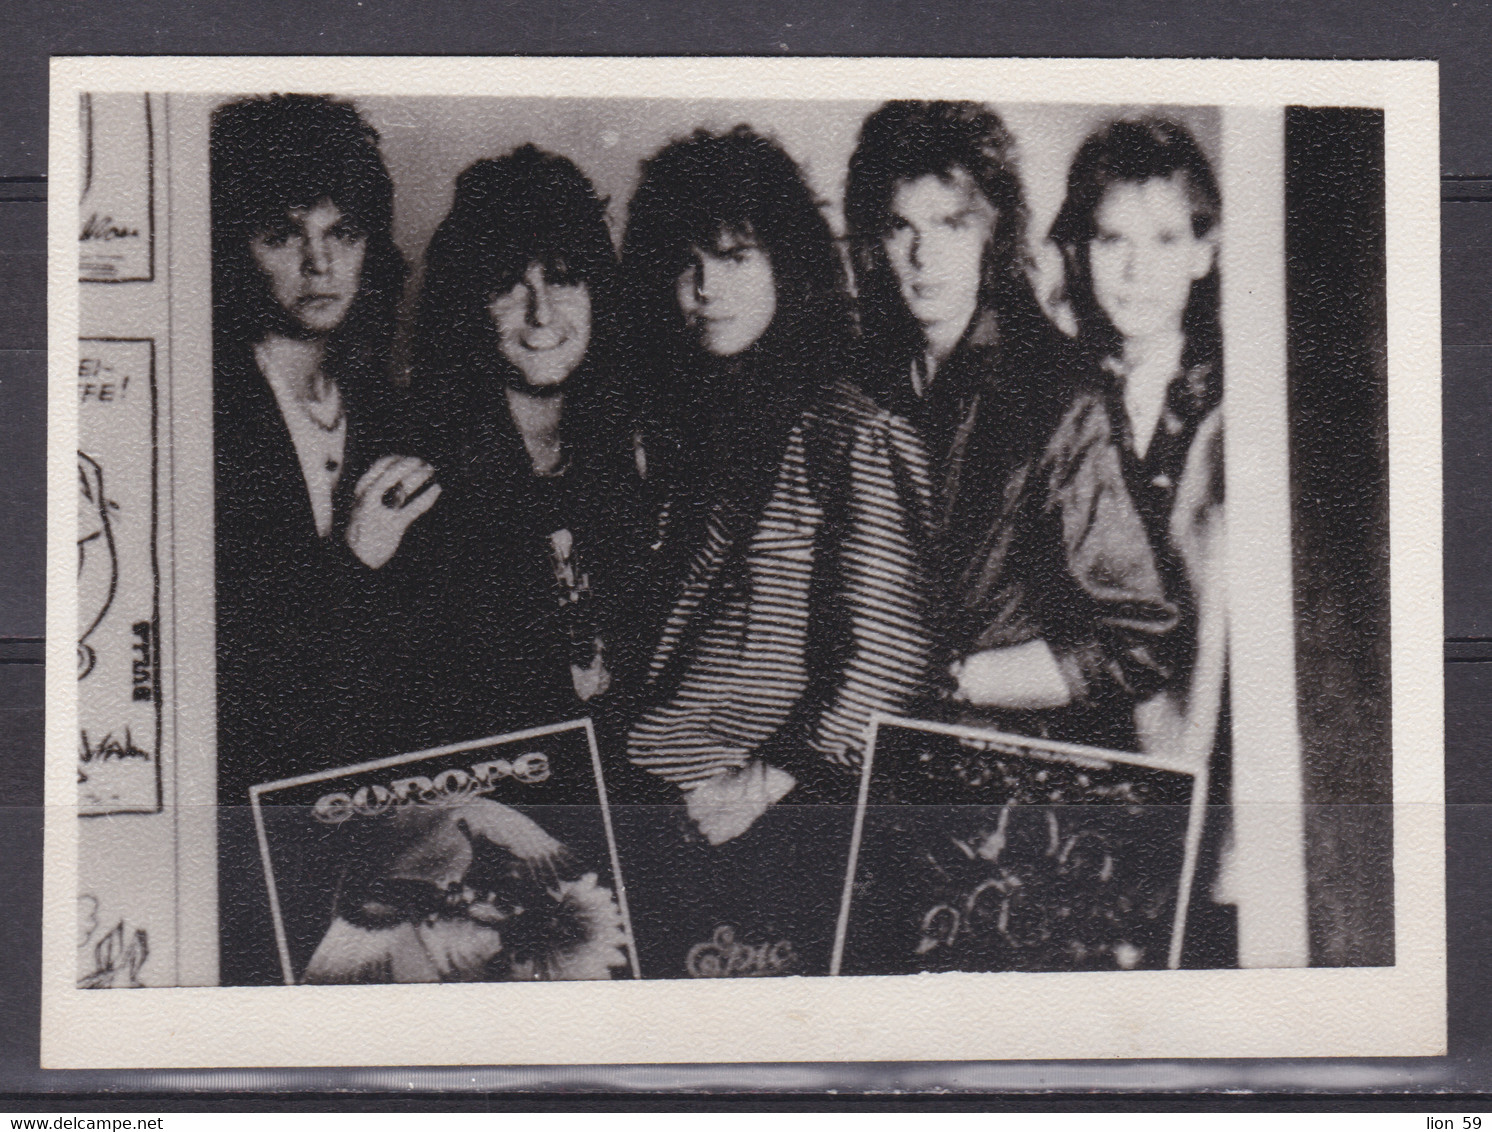 272895 / Europe (band) - Swedish Rock Band Formed In Upplands Väsby, Sweden In 1979, By Frontman Joey Tempest Photo - Fotos